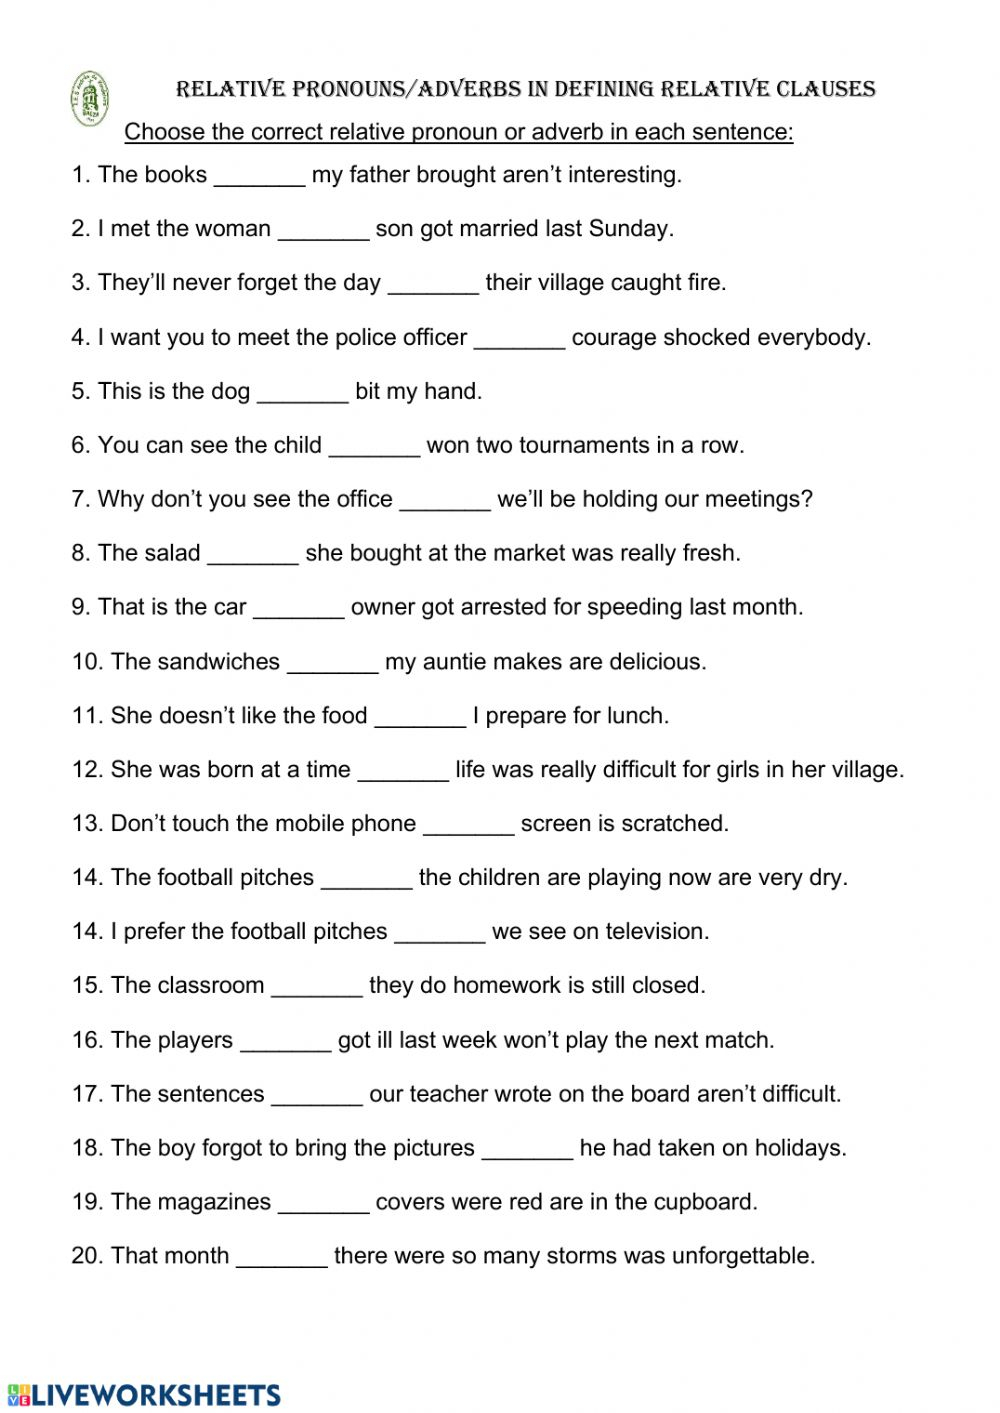 Adjective Clauses With Subject Relative Pronouns Worksheet